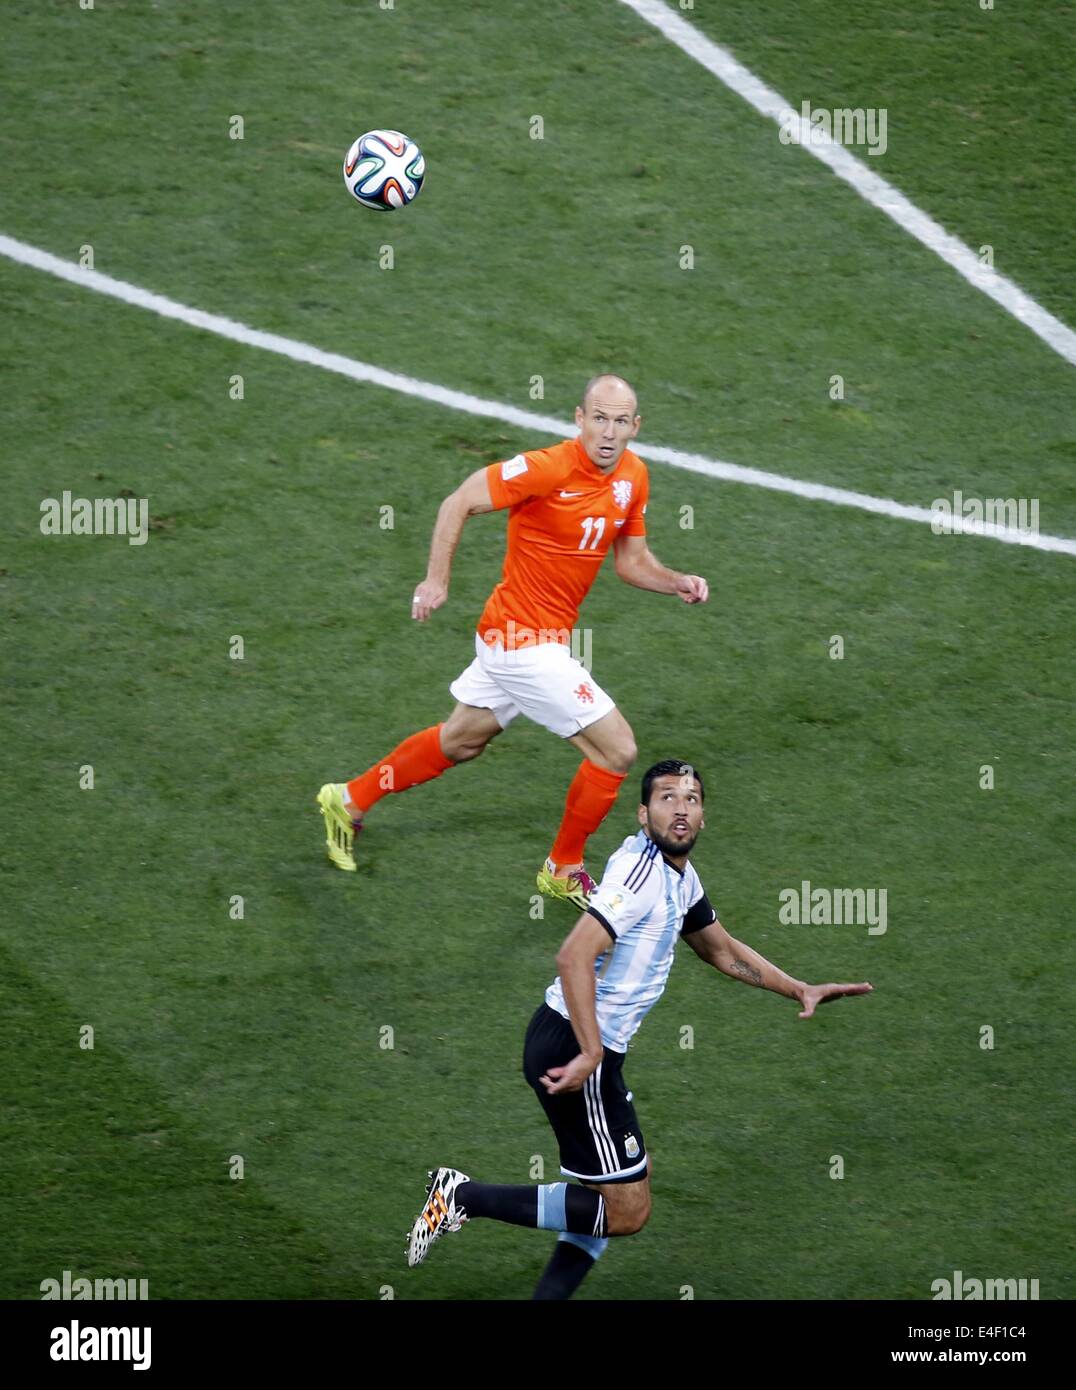 Sao Paulo, Brazil. 9th July, 2014. Netherlands' Arjen Robben vies with Argentina's Ezequiel Garay during a semifinal match between Netherlands and Argentina of 2014 FIFA World Cup at the Arena de Sao Paulo Stadium in Sao Paulo, Brazil, on July 9, 2014. Credit:  Liao Yujie/Xinhua/Alamy Live News Stock Photo